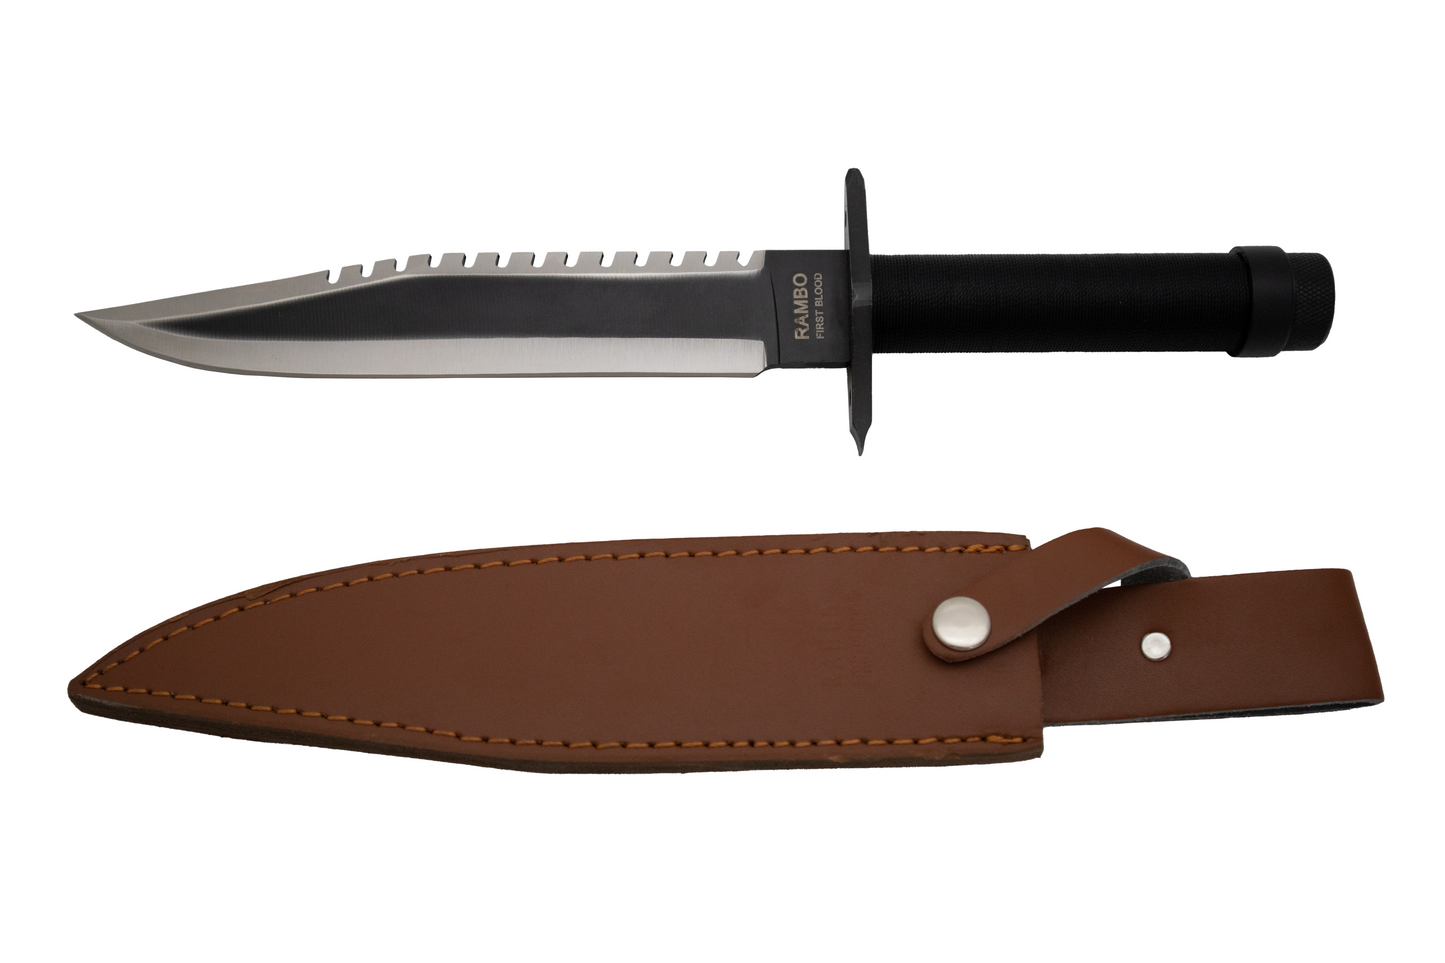 RAMBO FIRST BLOOD PART 1 SURVIVAL HUNTING KNIFE WITH LEATHER SHEATH